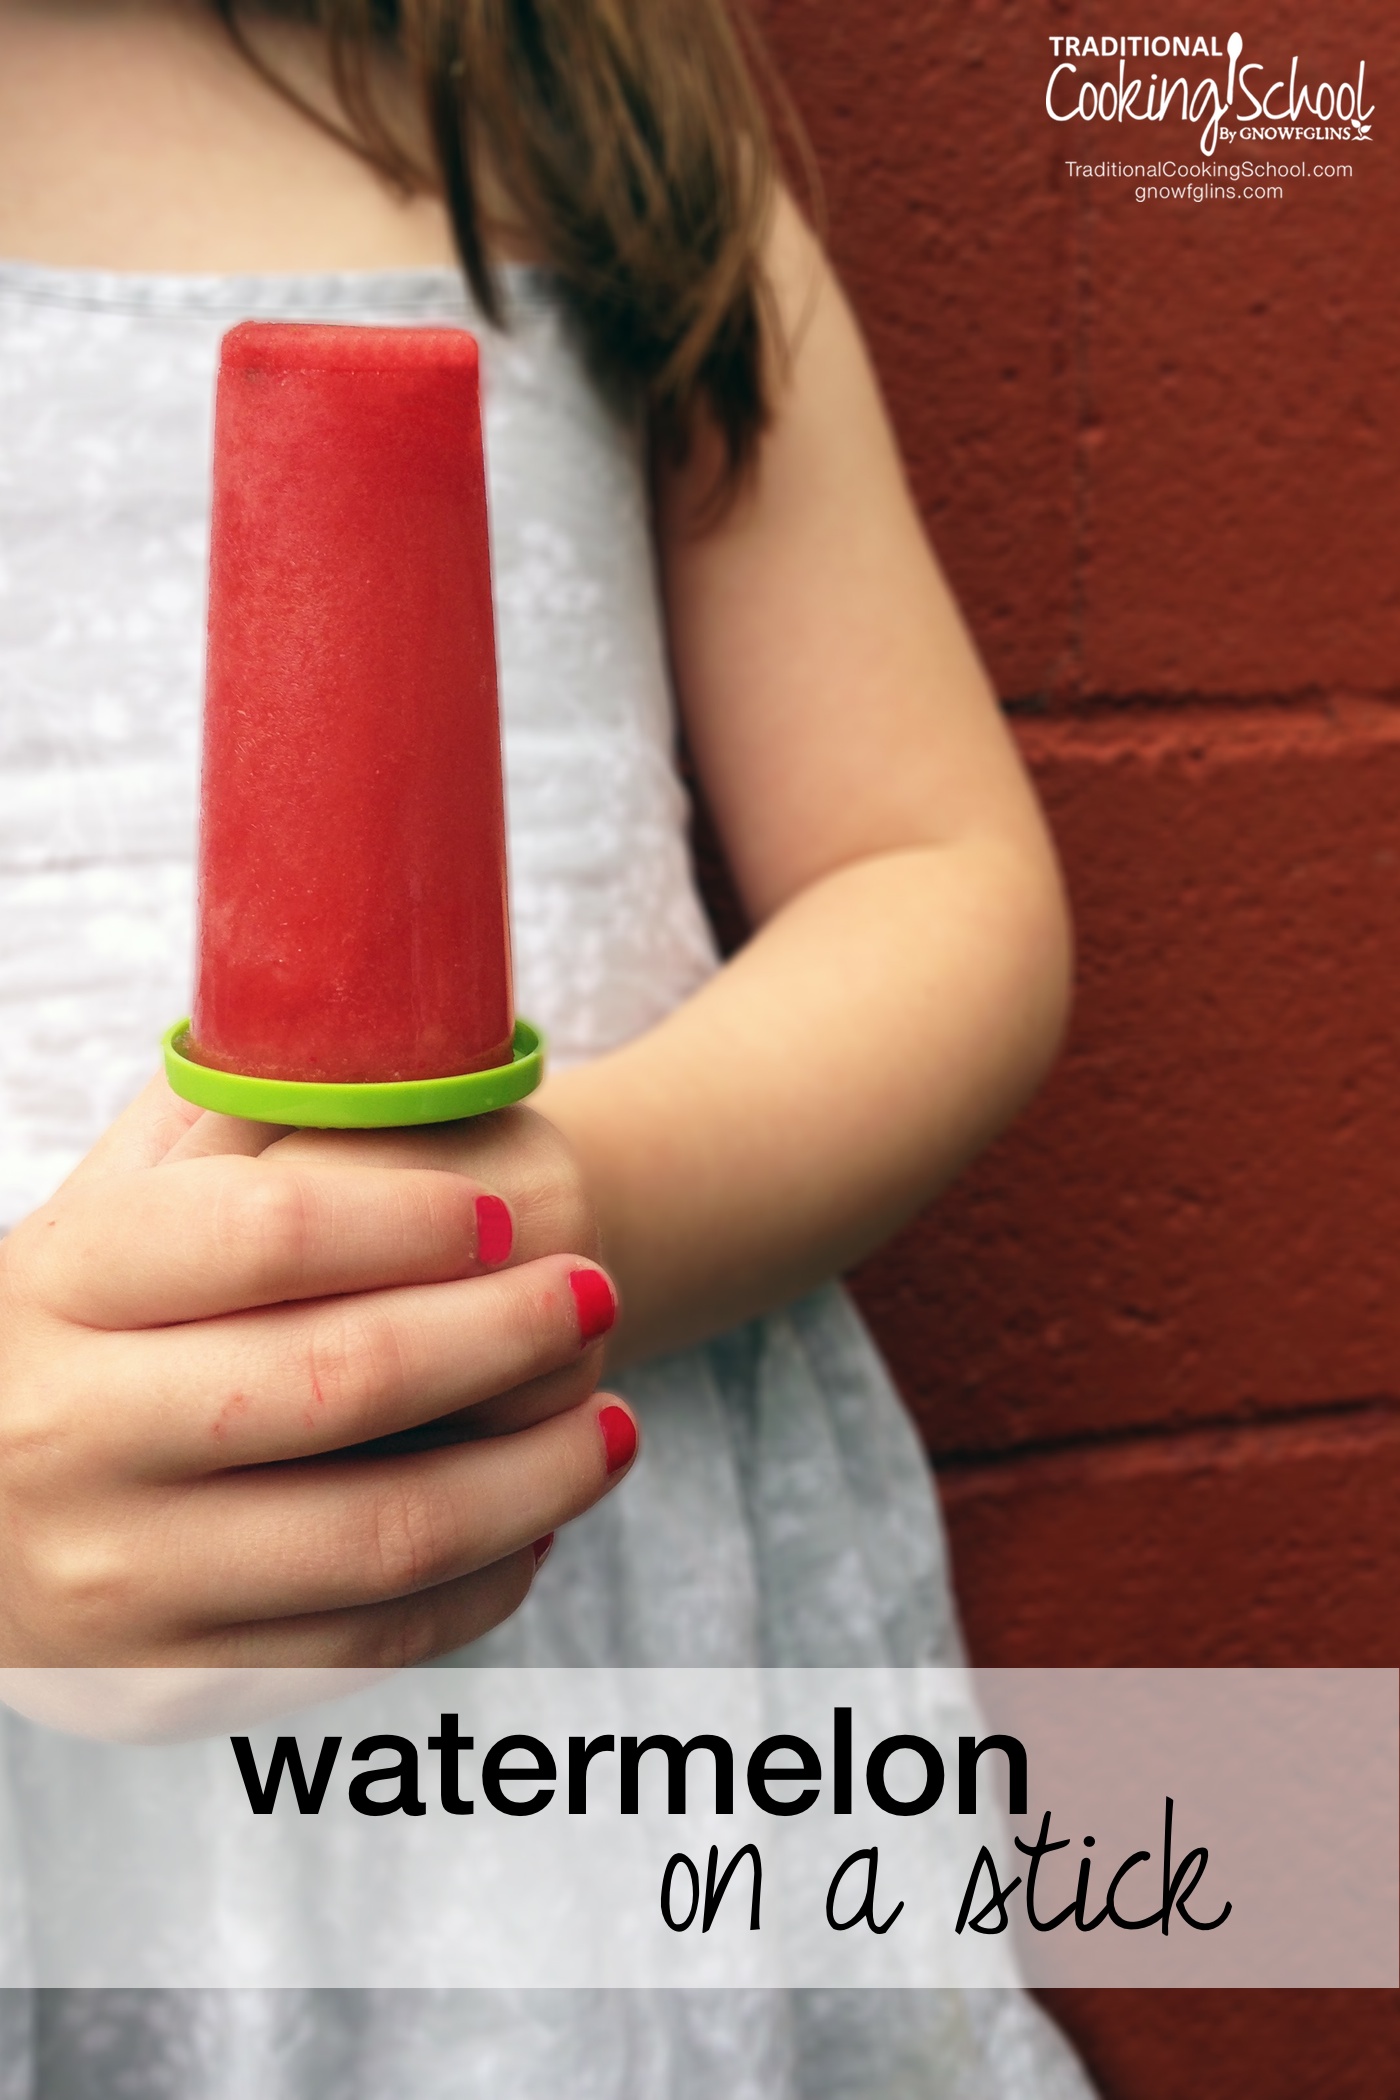 Watermelon On A Stick | Do you remember the large half-moons of watermelon? Taking giant bites with juice dribbling down your chin? Challenging each other to seed-spitting contests? We love watermelon! It's the fruit of summer memories, and these watermelon popsicles are sure memory-makers. | TraditionalCookingSchool.com